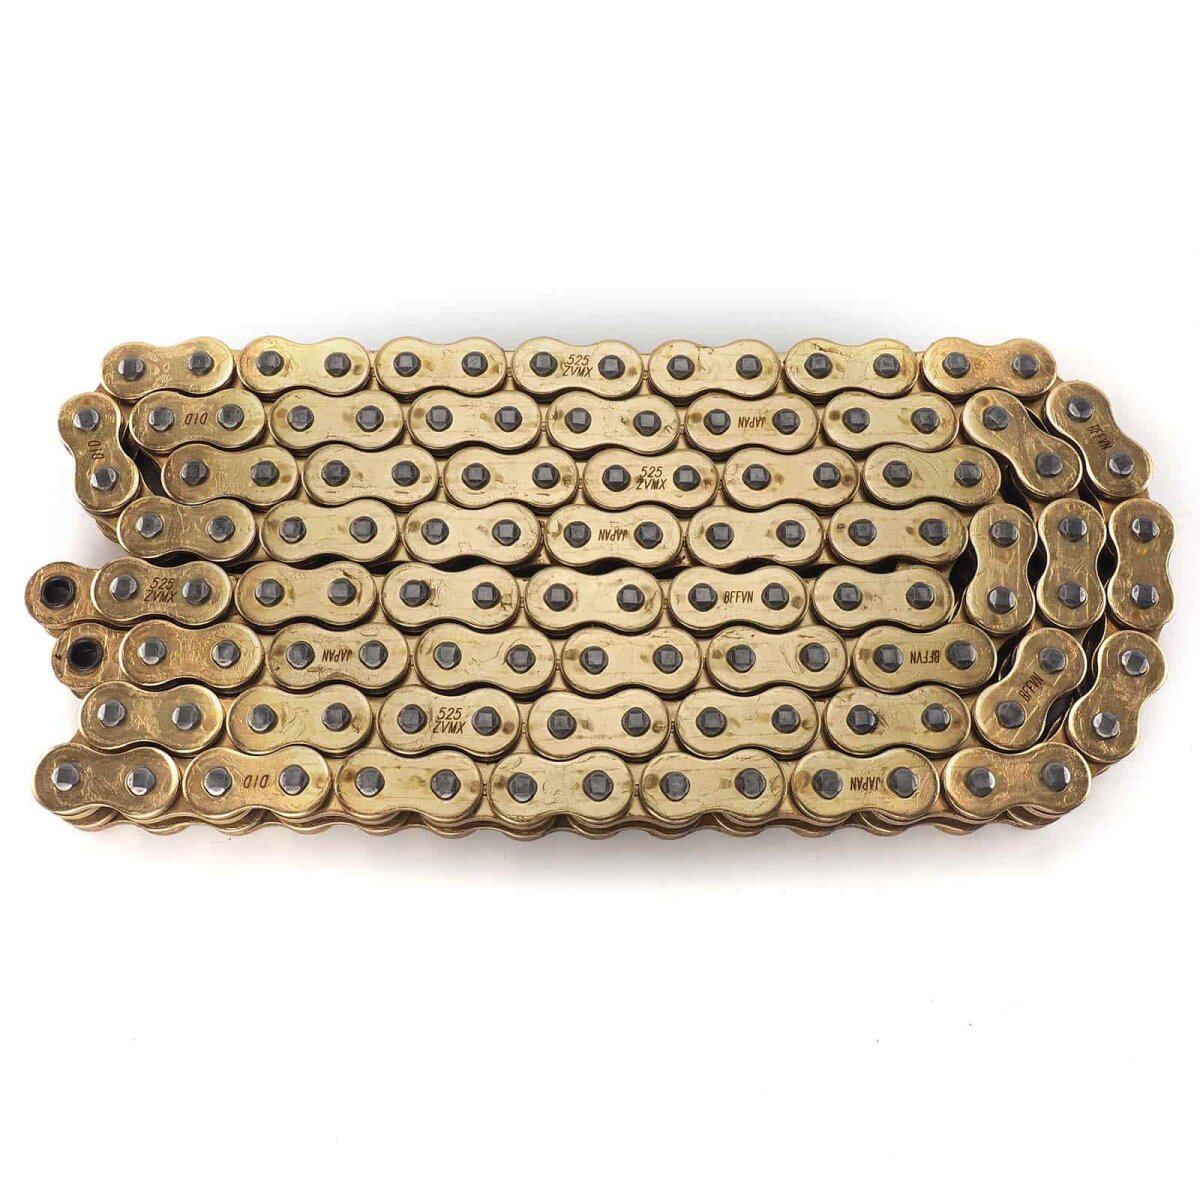 D.I.D X-ring chain G&G 525ZVMX2/114 with rivet lock, 129,39 € for 